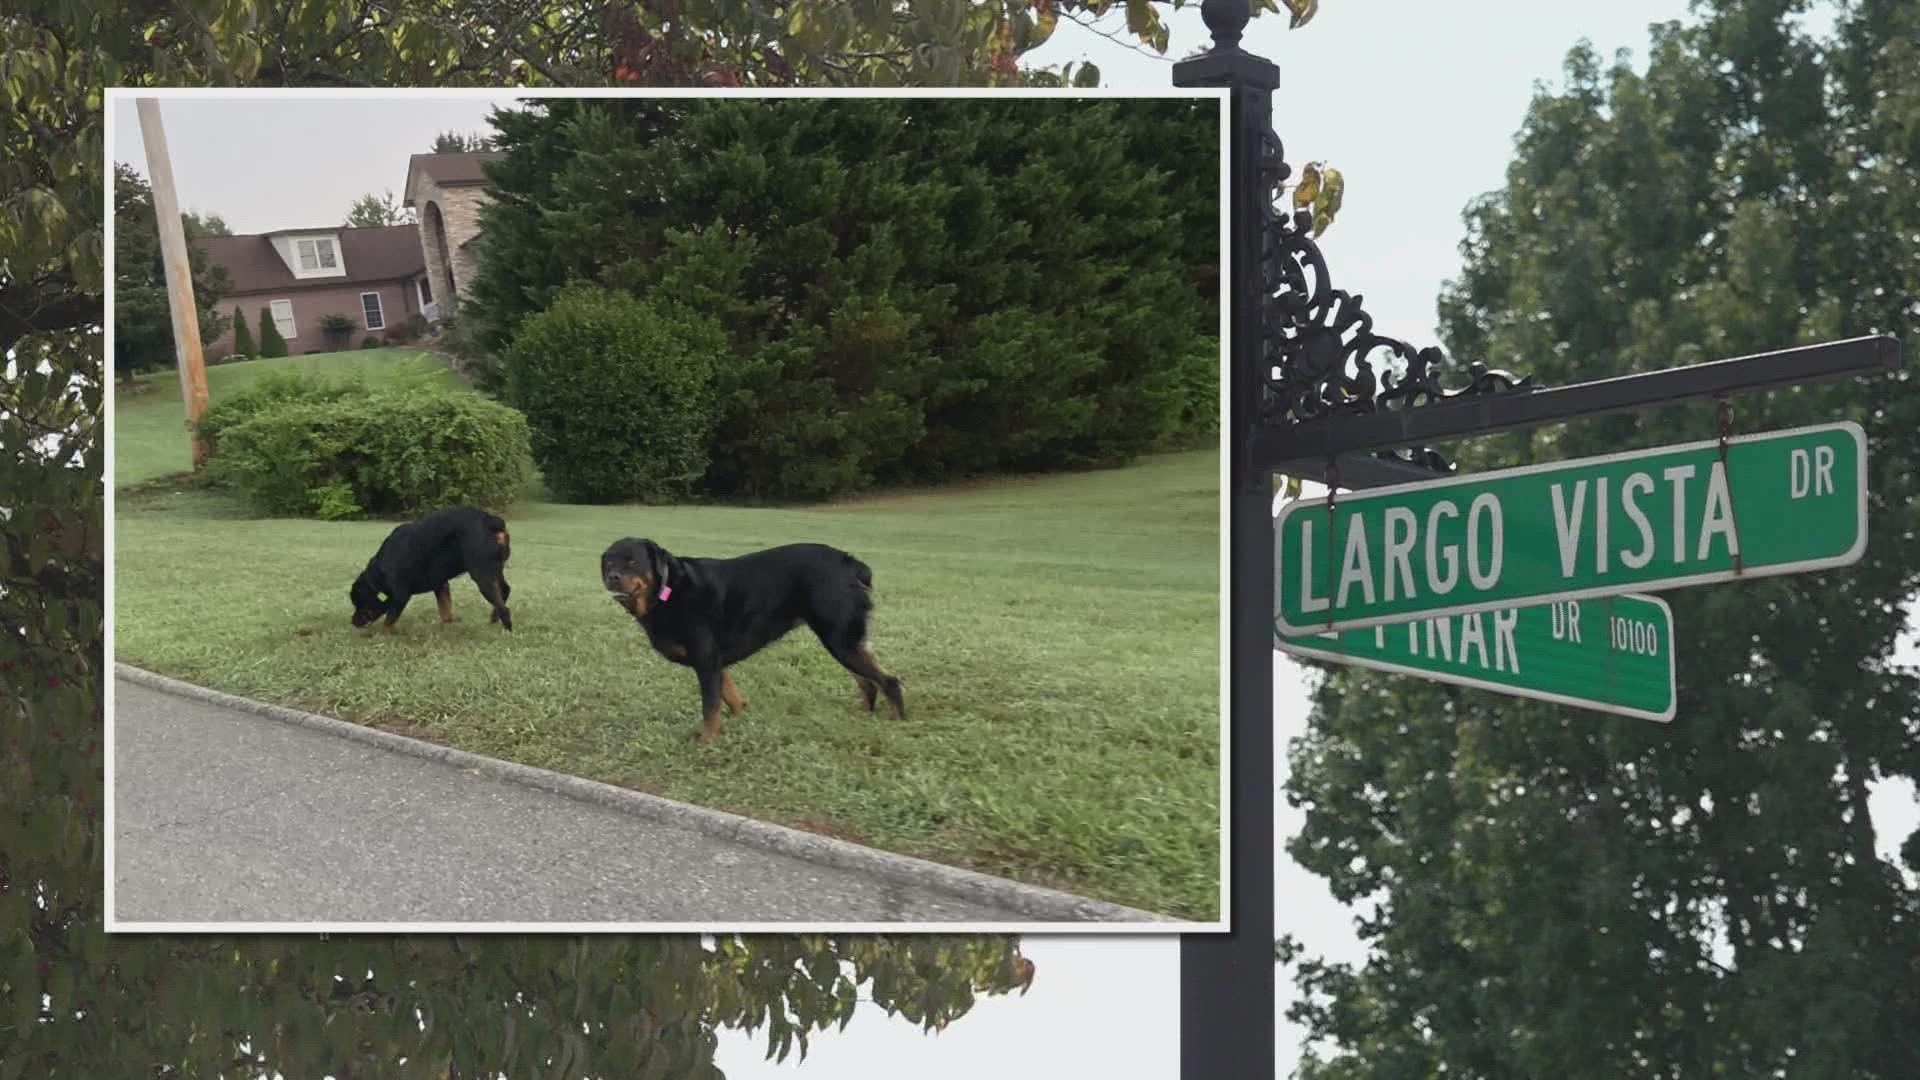 A man took his small dog out for a walk near Farragut, before he was attacked by two larger dogs and he ran to a neighbor's garage for safety.